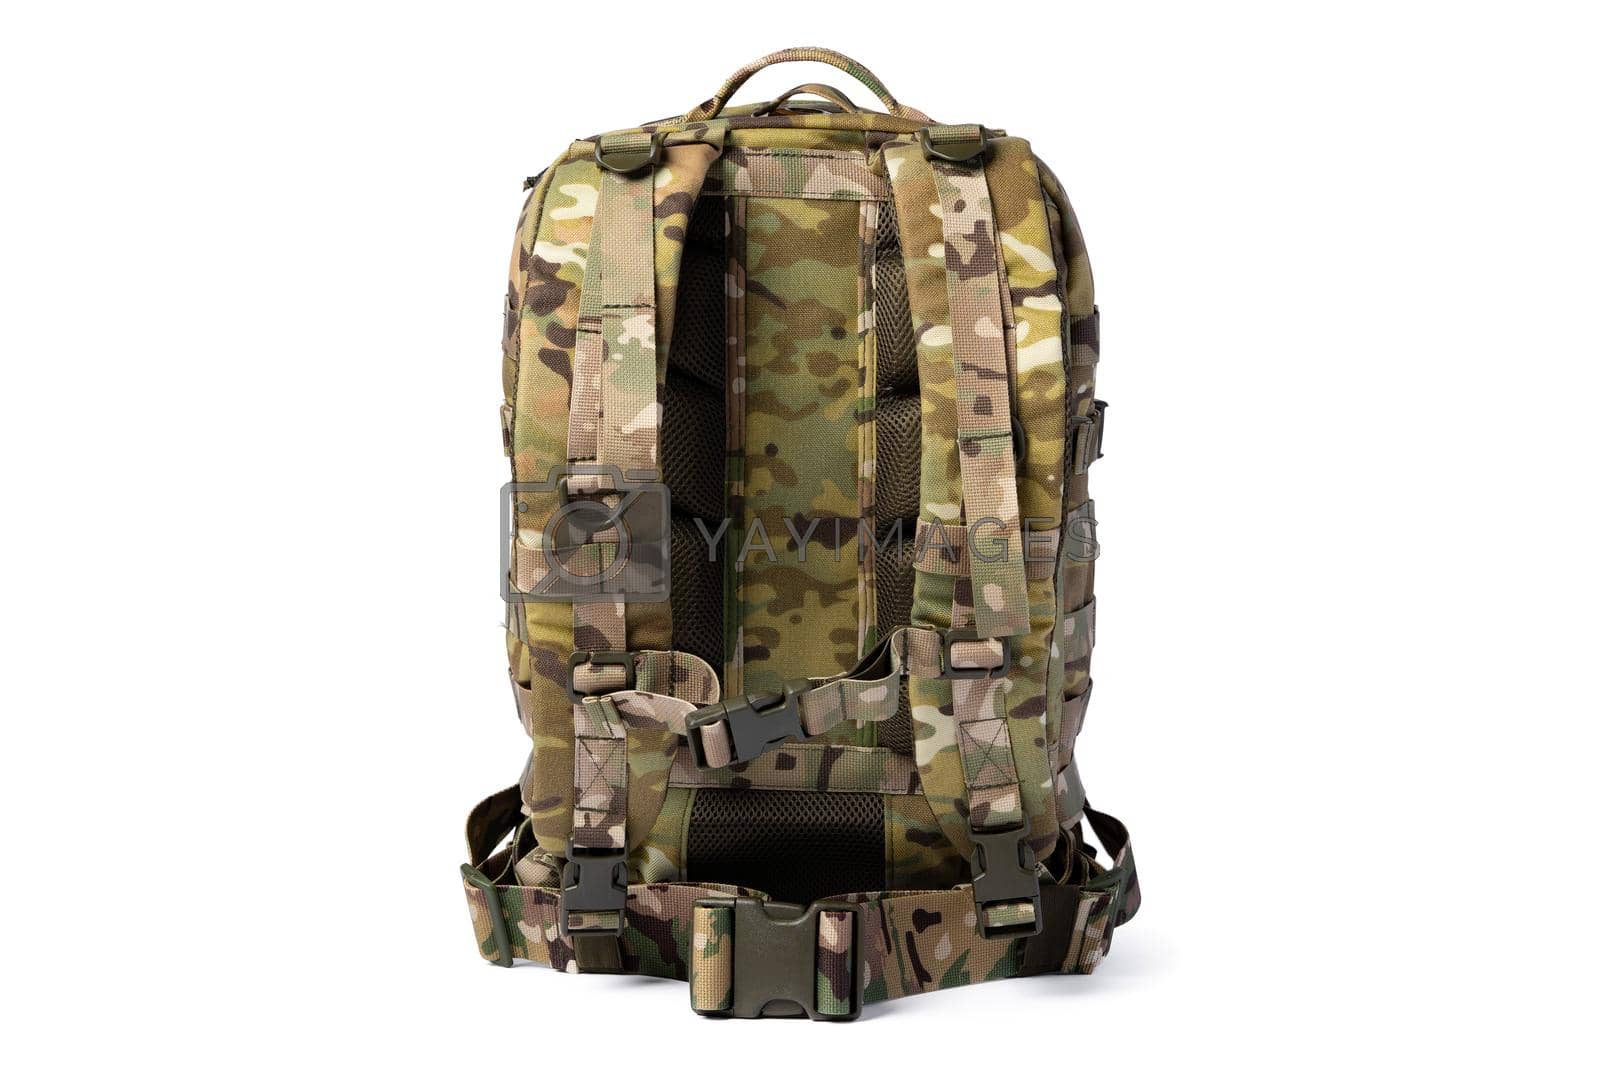 Royalty free image of Military backpack isolated on a white background. by Fabrikasimf